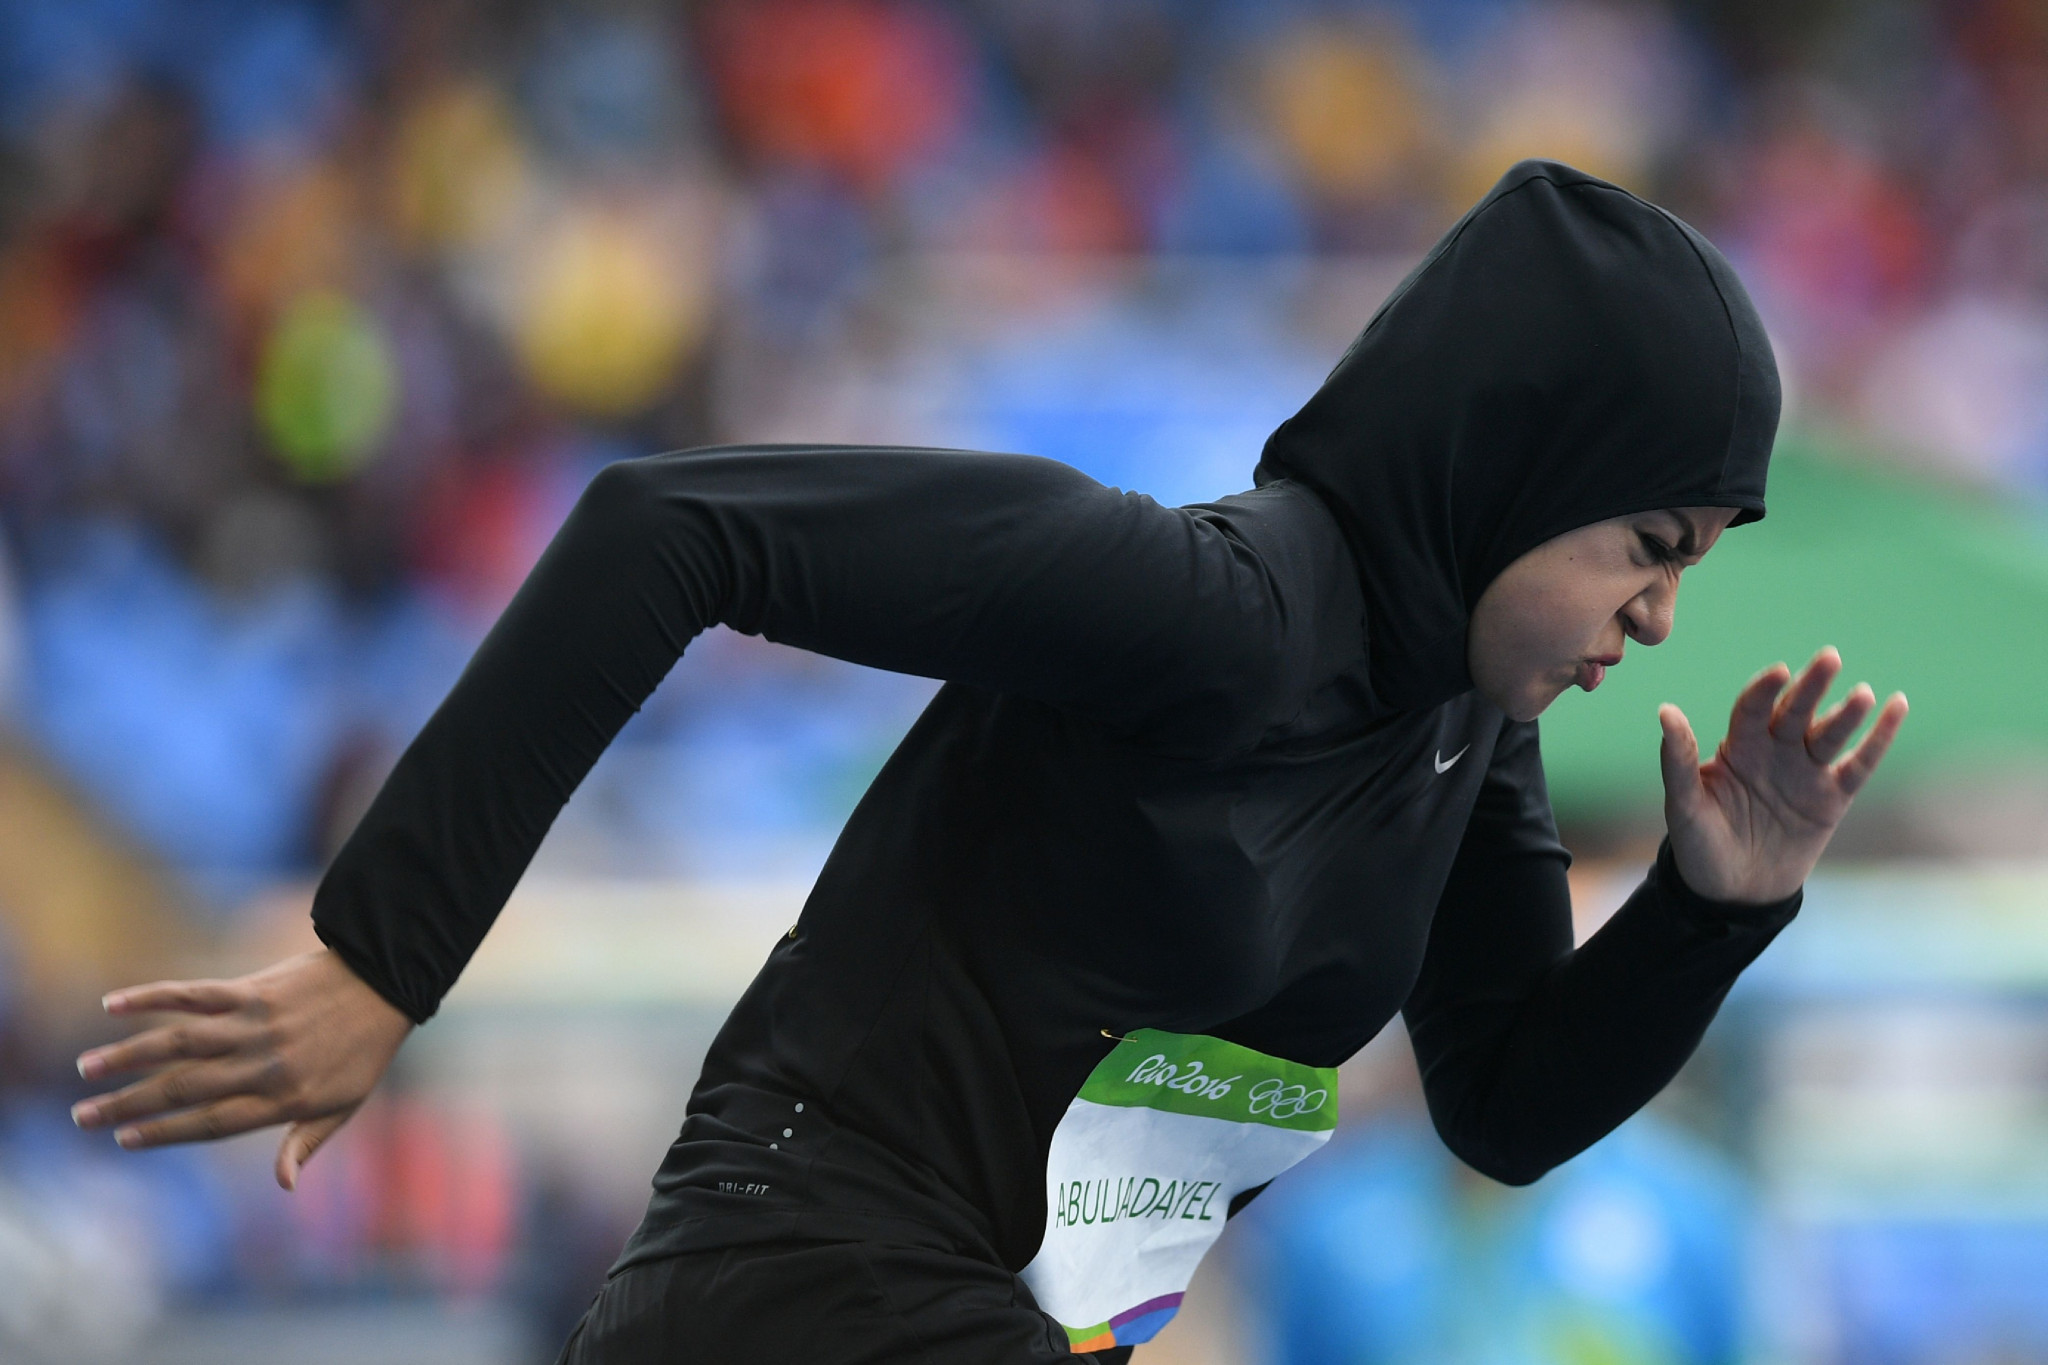 The programme hopes to get more Saudi students into sport and, eventually, competing at the Olympic Games ©Getty Images